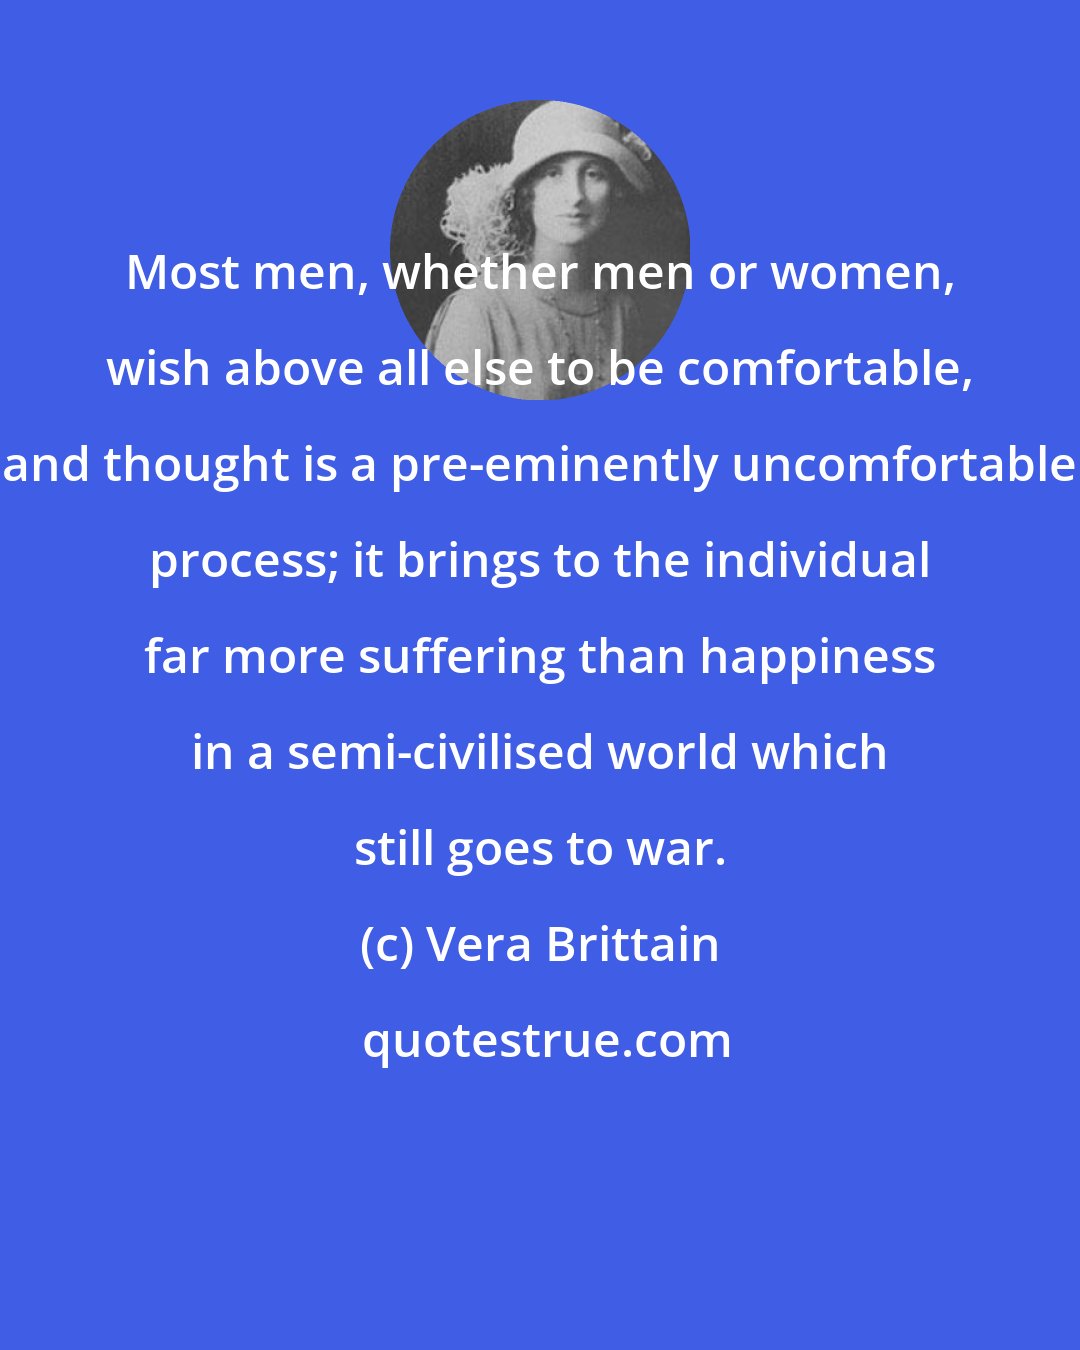 Vera Brittain: Most men, whether men or women, wish above all else to be comfortable, and thought is a pre-eminently uncomfortable process; it brings to the individual far more suffering than happiness in a semi-civilised world which still goes to war.